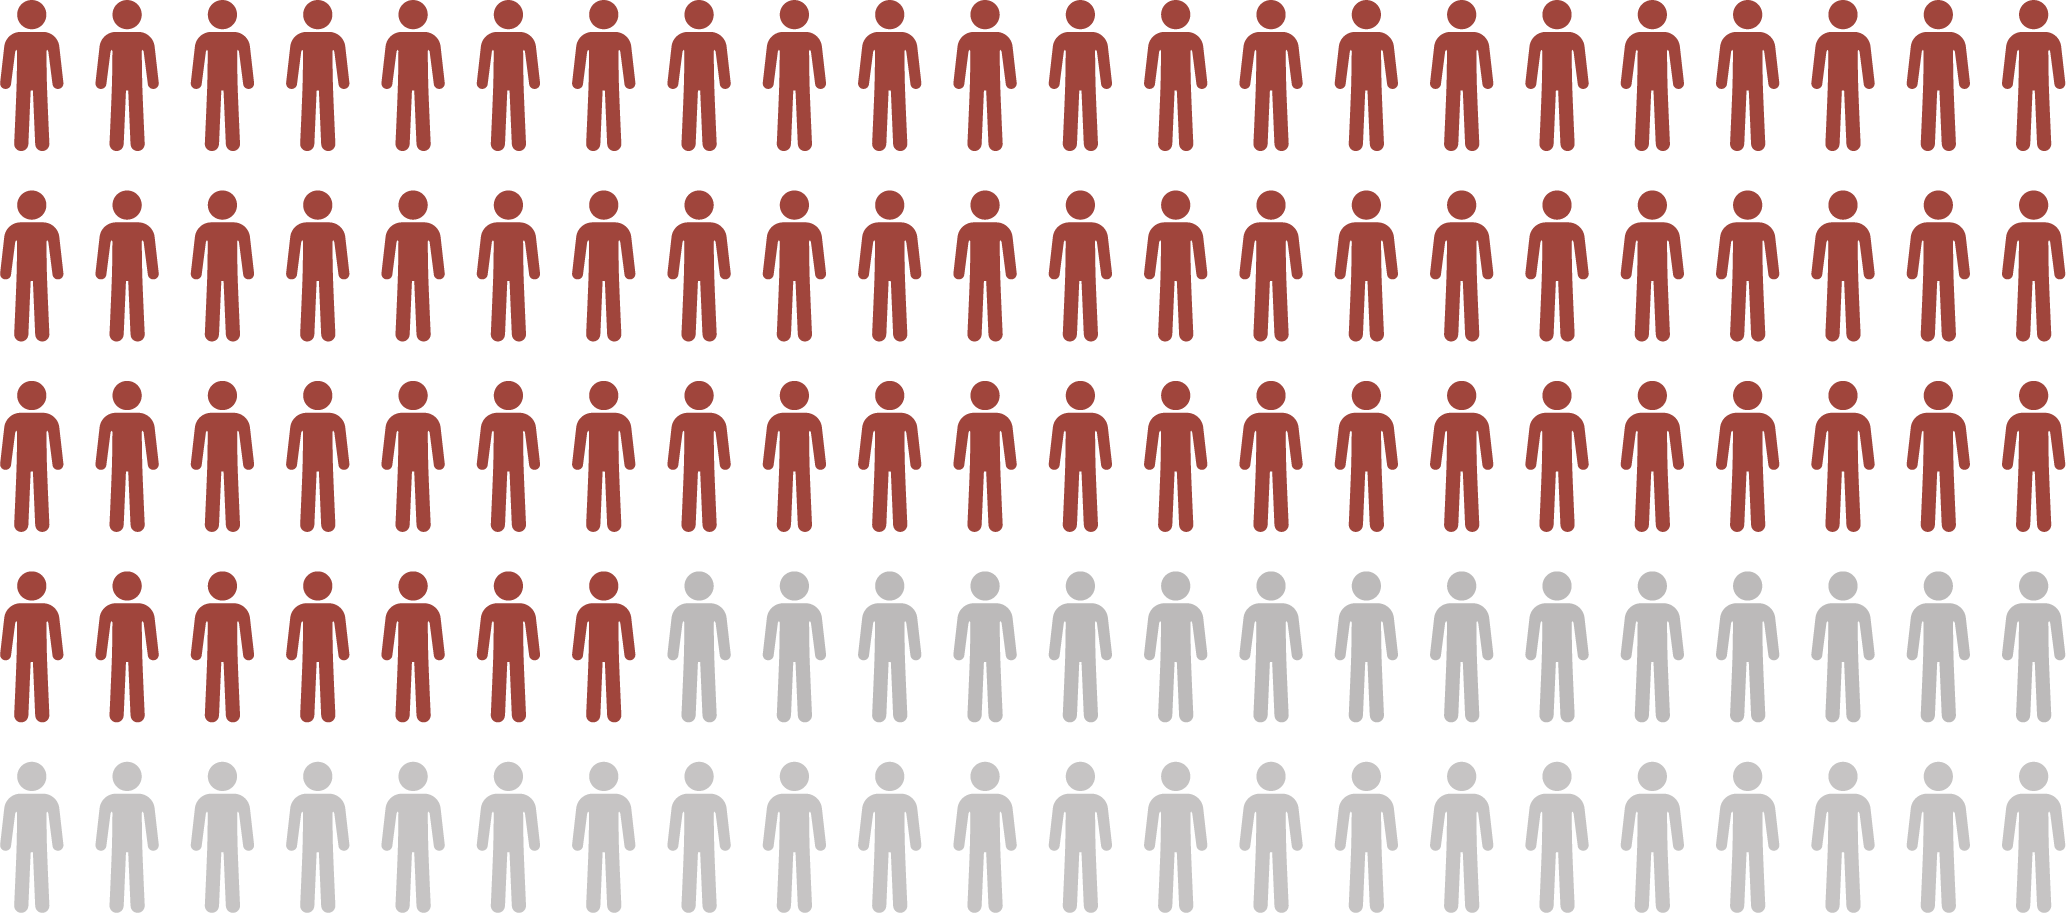 67% support, depicted as 110 people with 73 of them colored red